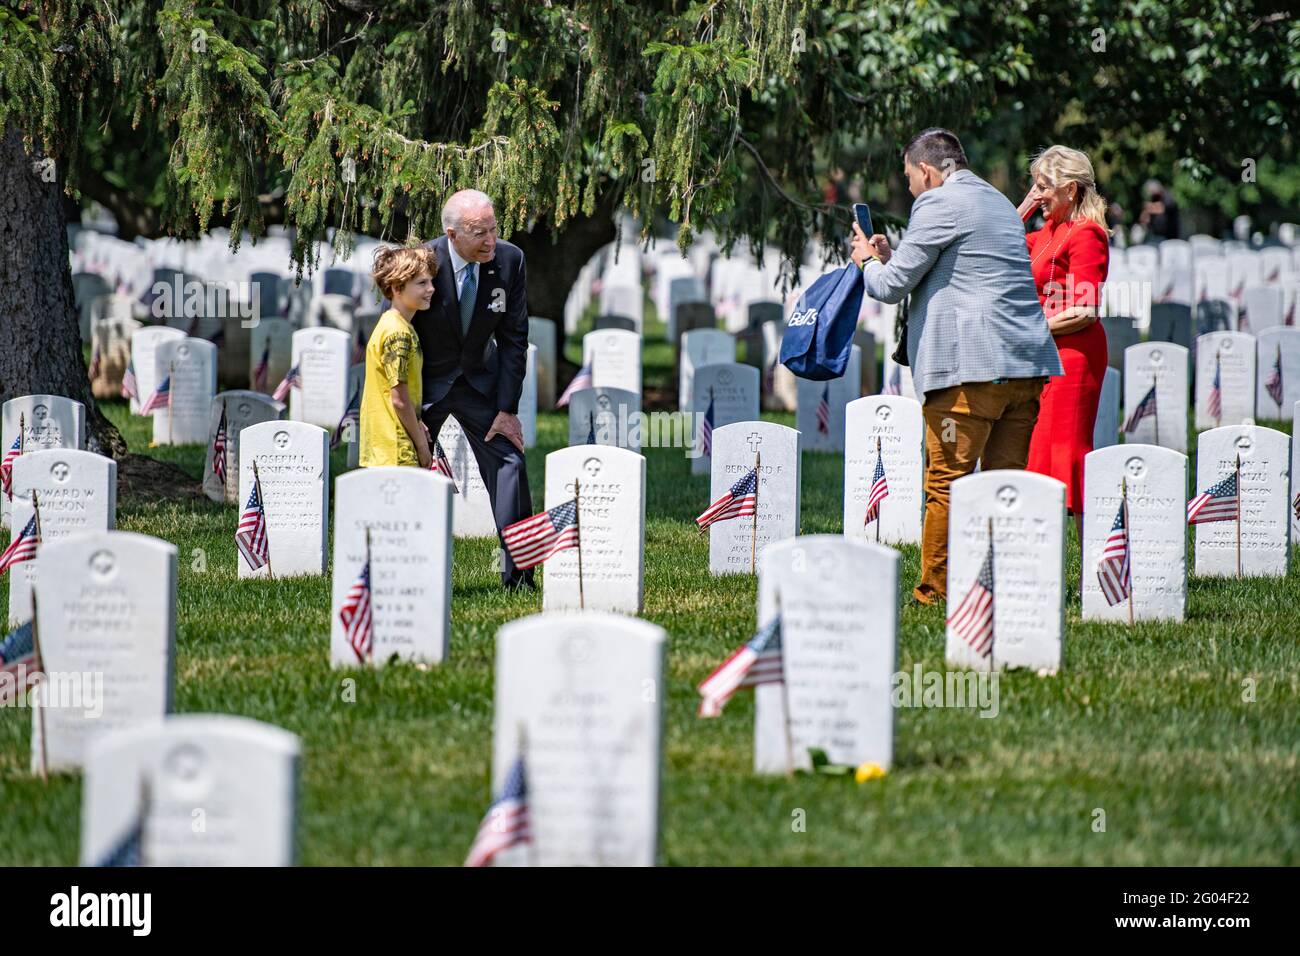 Arlington, United States Of America. 31st May, 2021. U.S President Joe Biden and First Lady Dr. Jill Biden stop in Section 12 to visit family members following National Memorial Day Observance at Arlington National Cemetery May 31, 2021 Arlington, Virginia. Credit: Planetpix/Alamy Live News Stock Photo